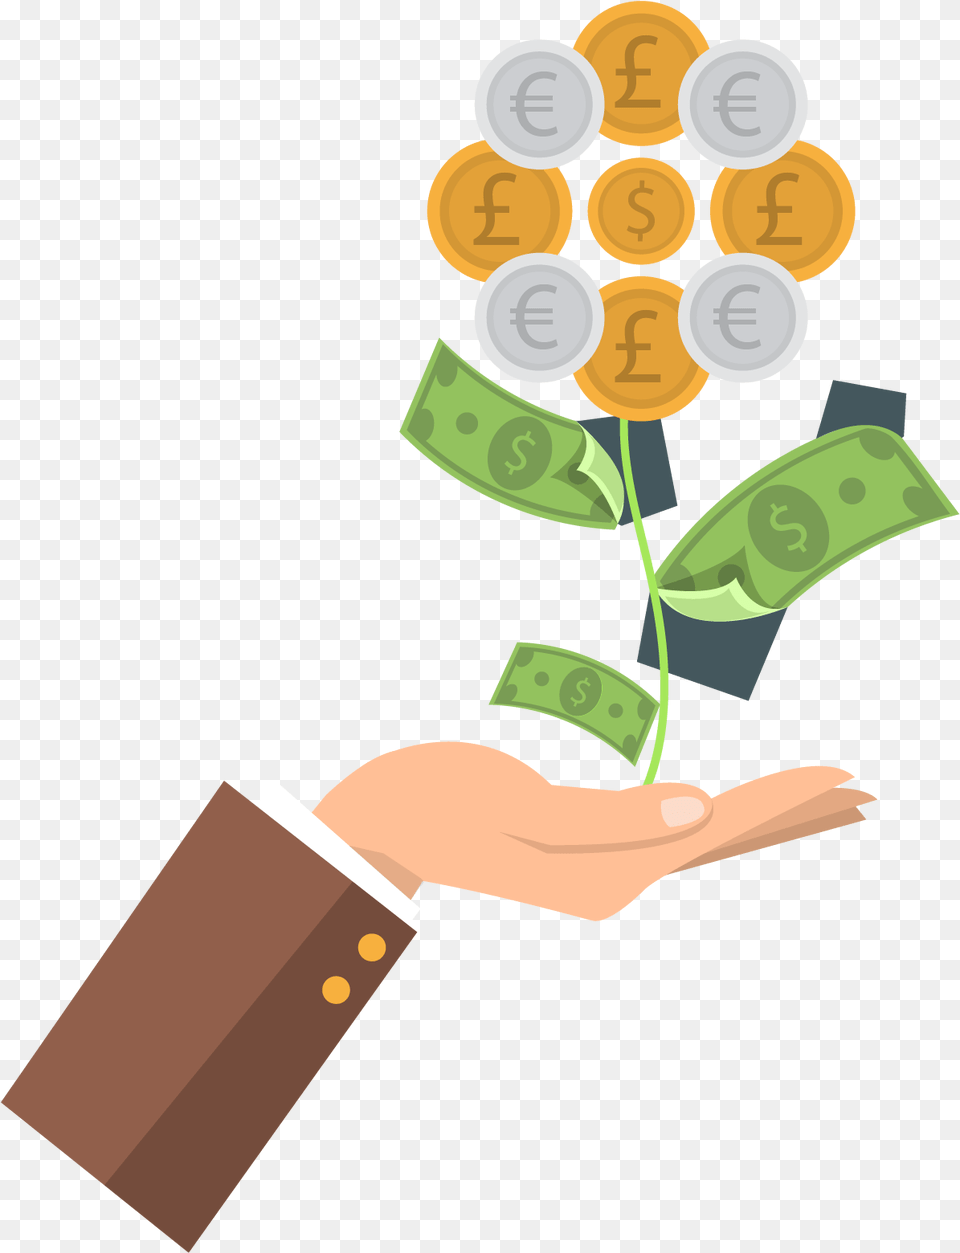 Service Business Money Hand Vector Gold Bank Clipart Mua Nh Hay Thu Nh Png